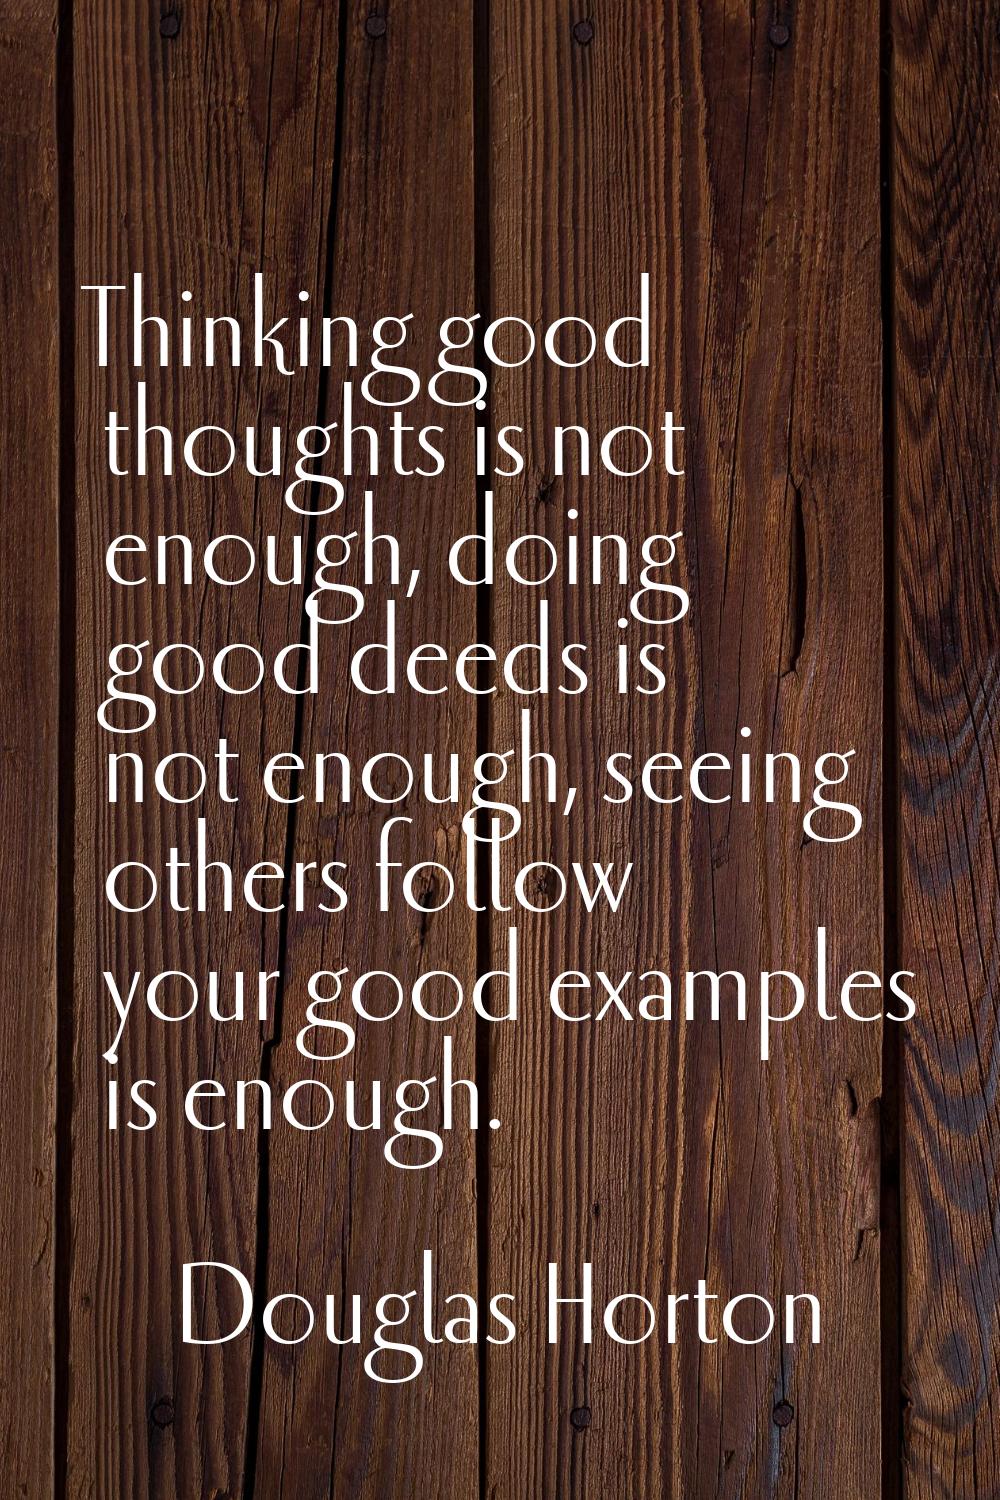 Thinking good thoughts is not enough, doing good deeds is not enough, seeing others follow your goo